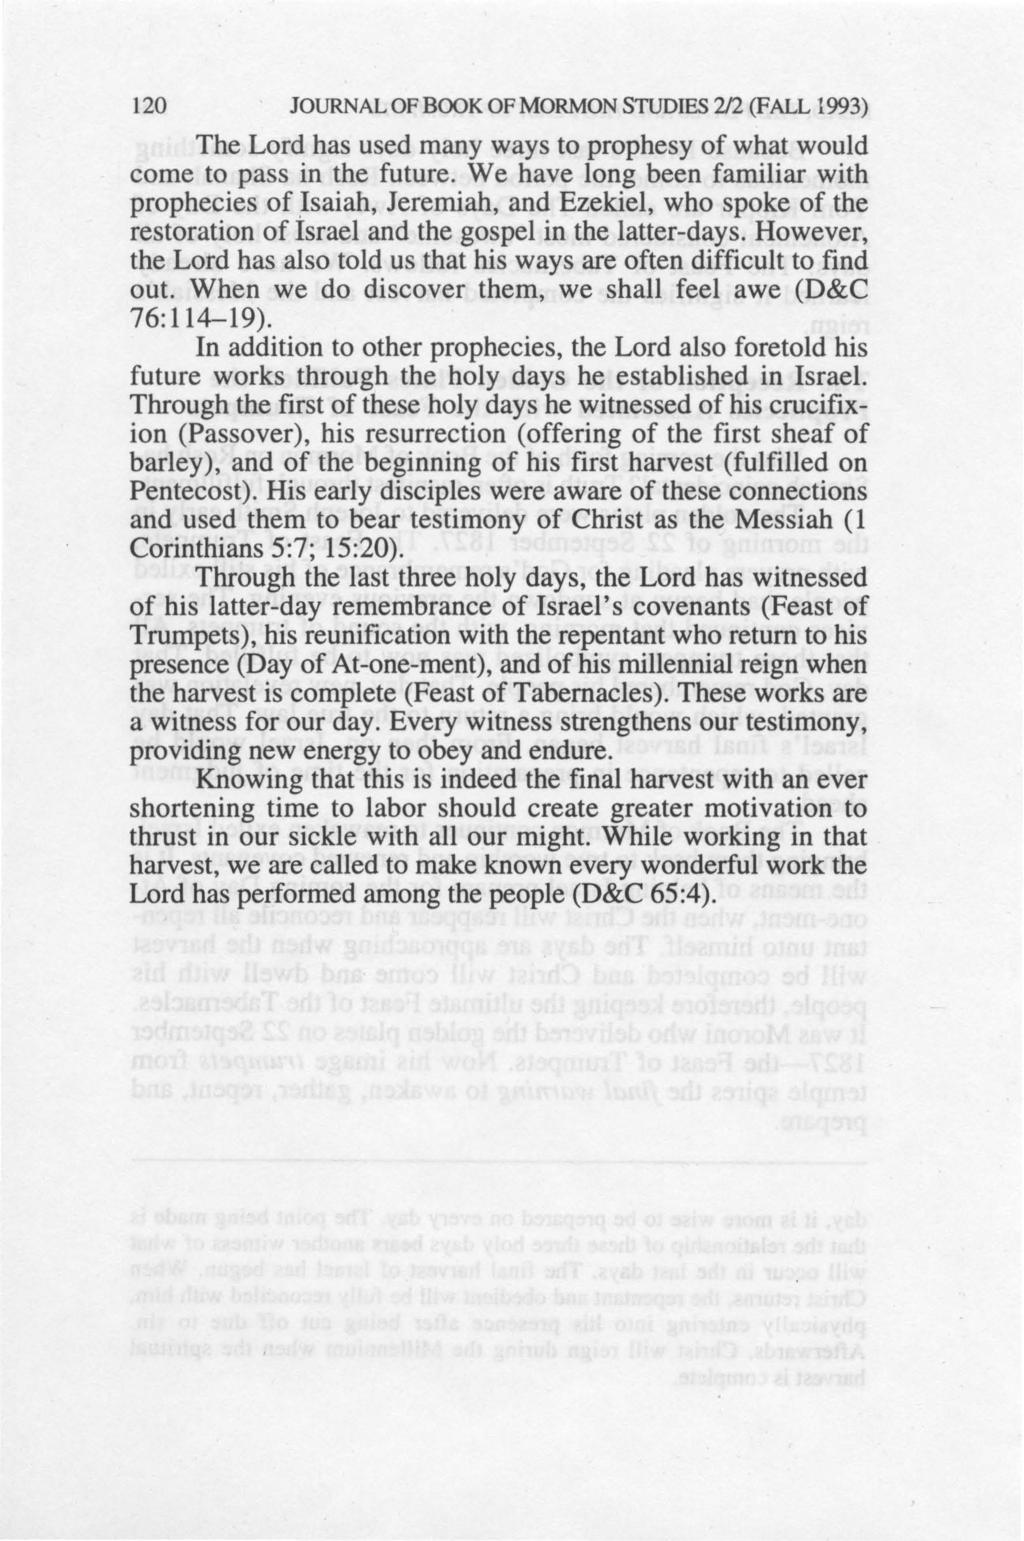 120 JOURNAL OF BOOK OF MORMON STUDIES 2J2 (FALL 1993) The Lord has used many ways to prophesy of what would come to pass in the future.